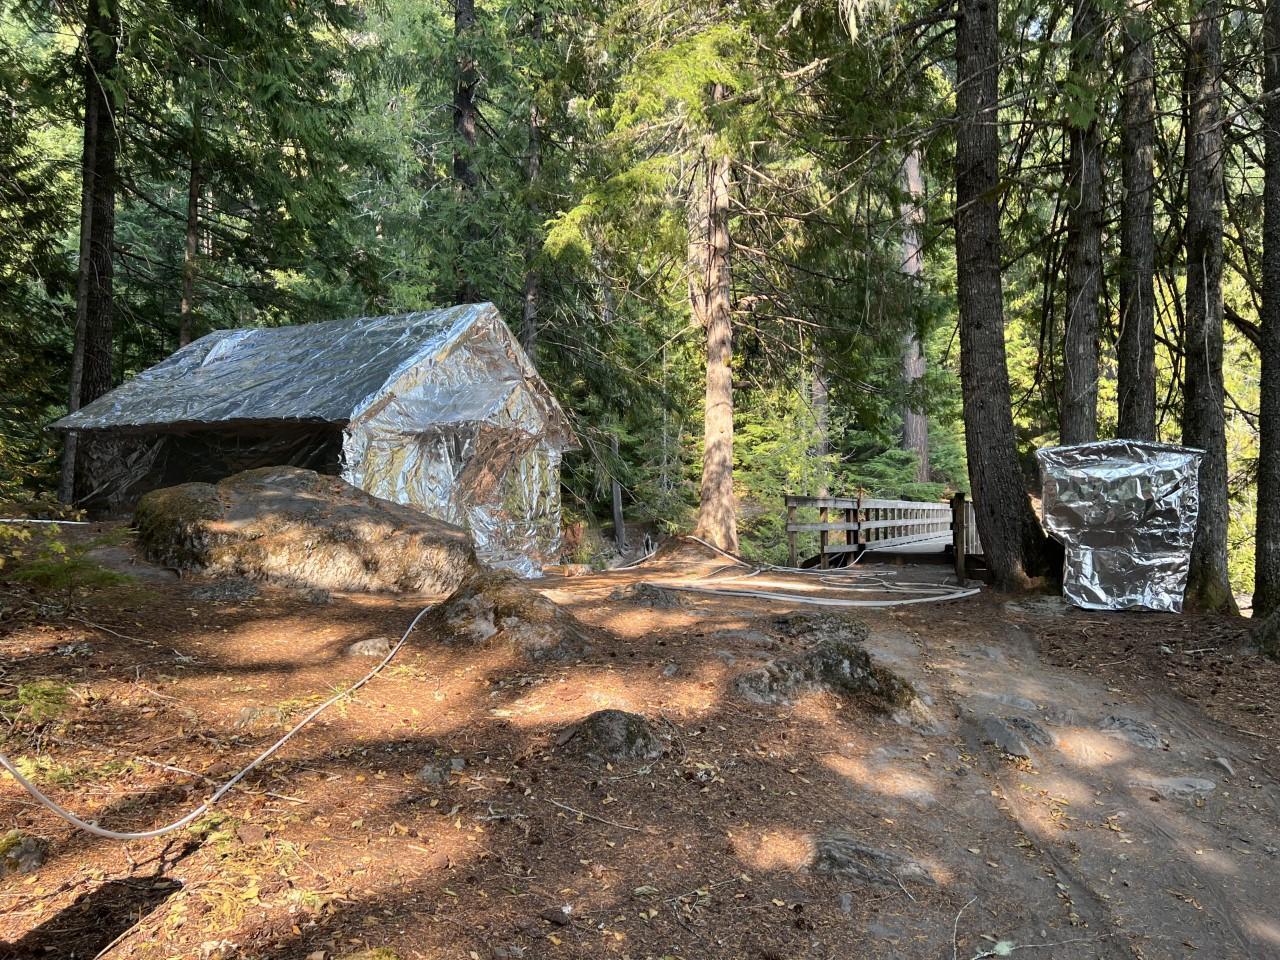 Two structures in the forest are covered with fire-resistant wrap. Hoses are on the ground around them, to provide water in case the fire reaches this area.